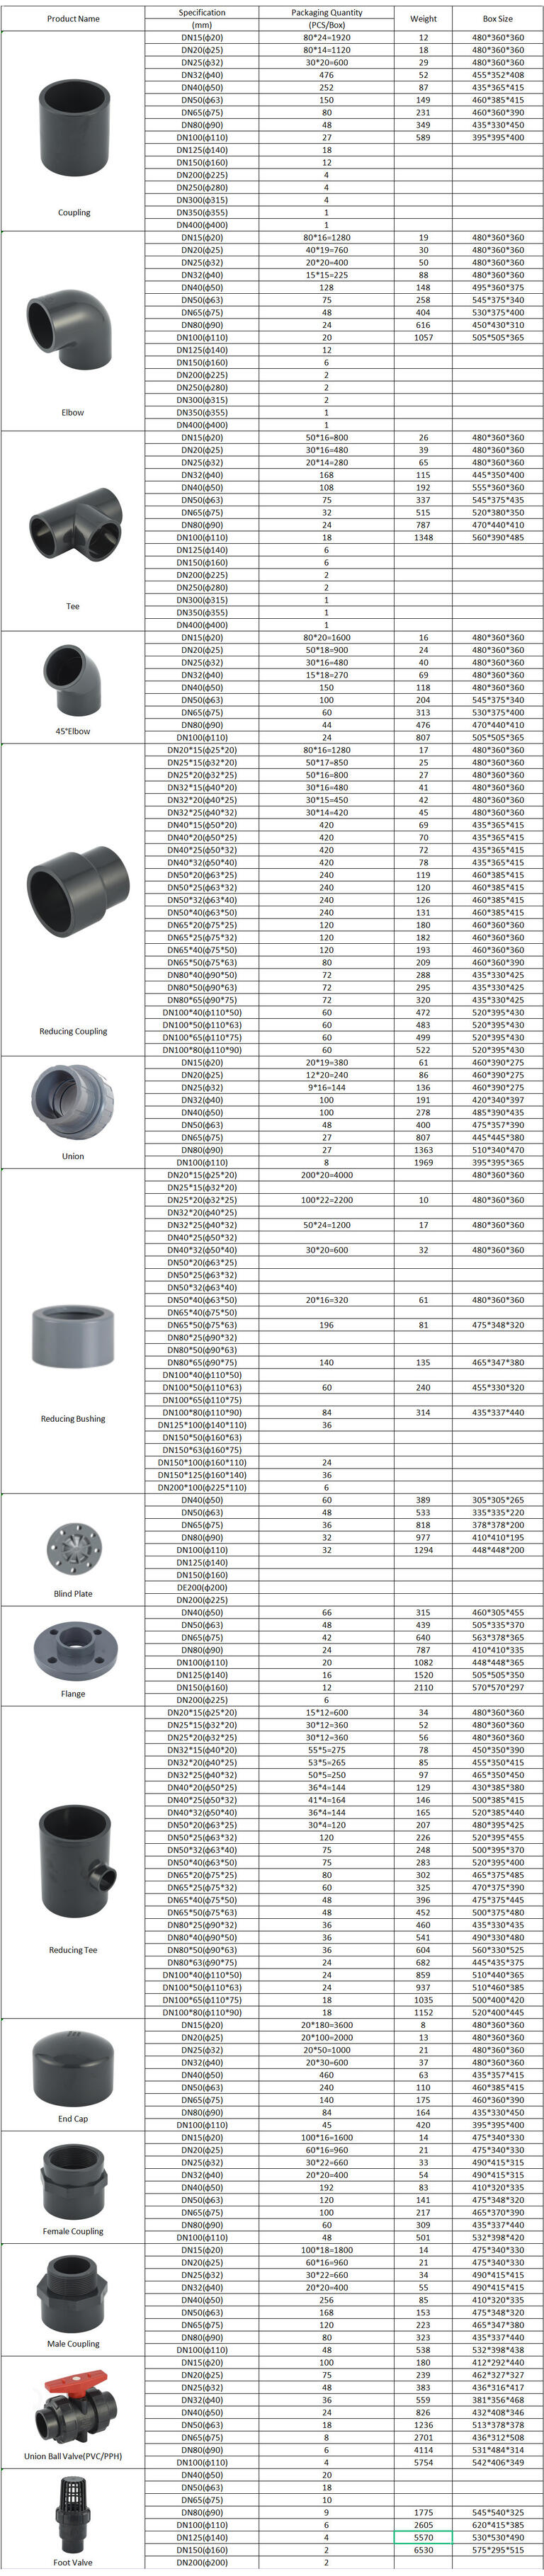 This picture shows the PVC DIN fittings specification